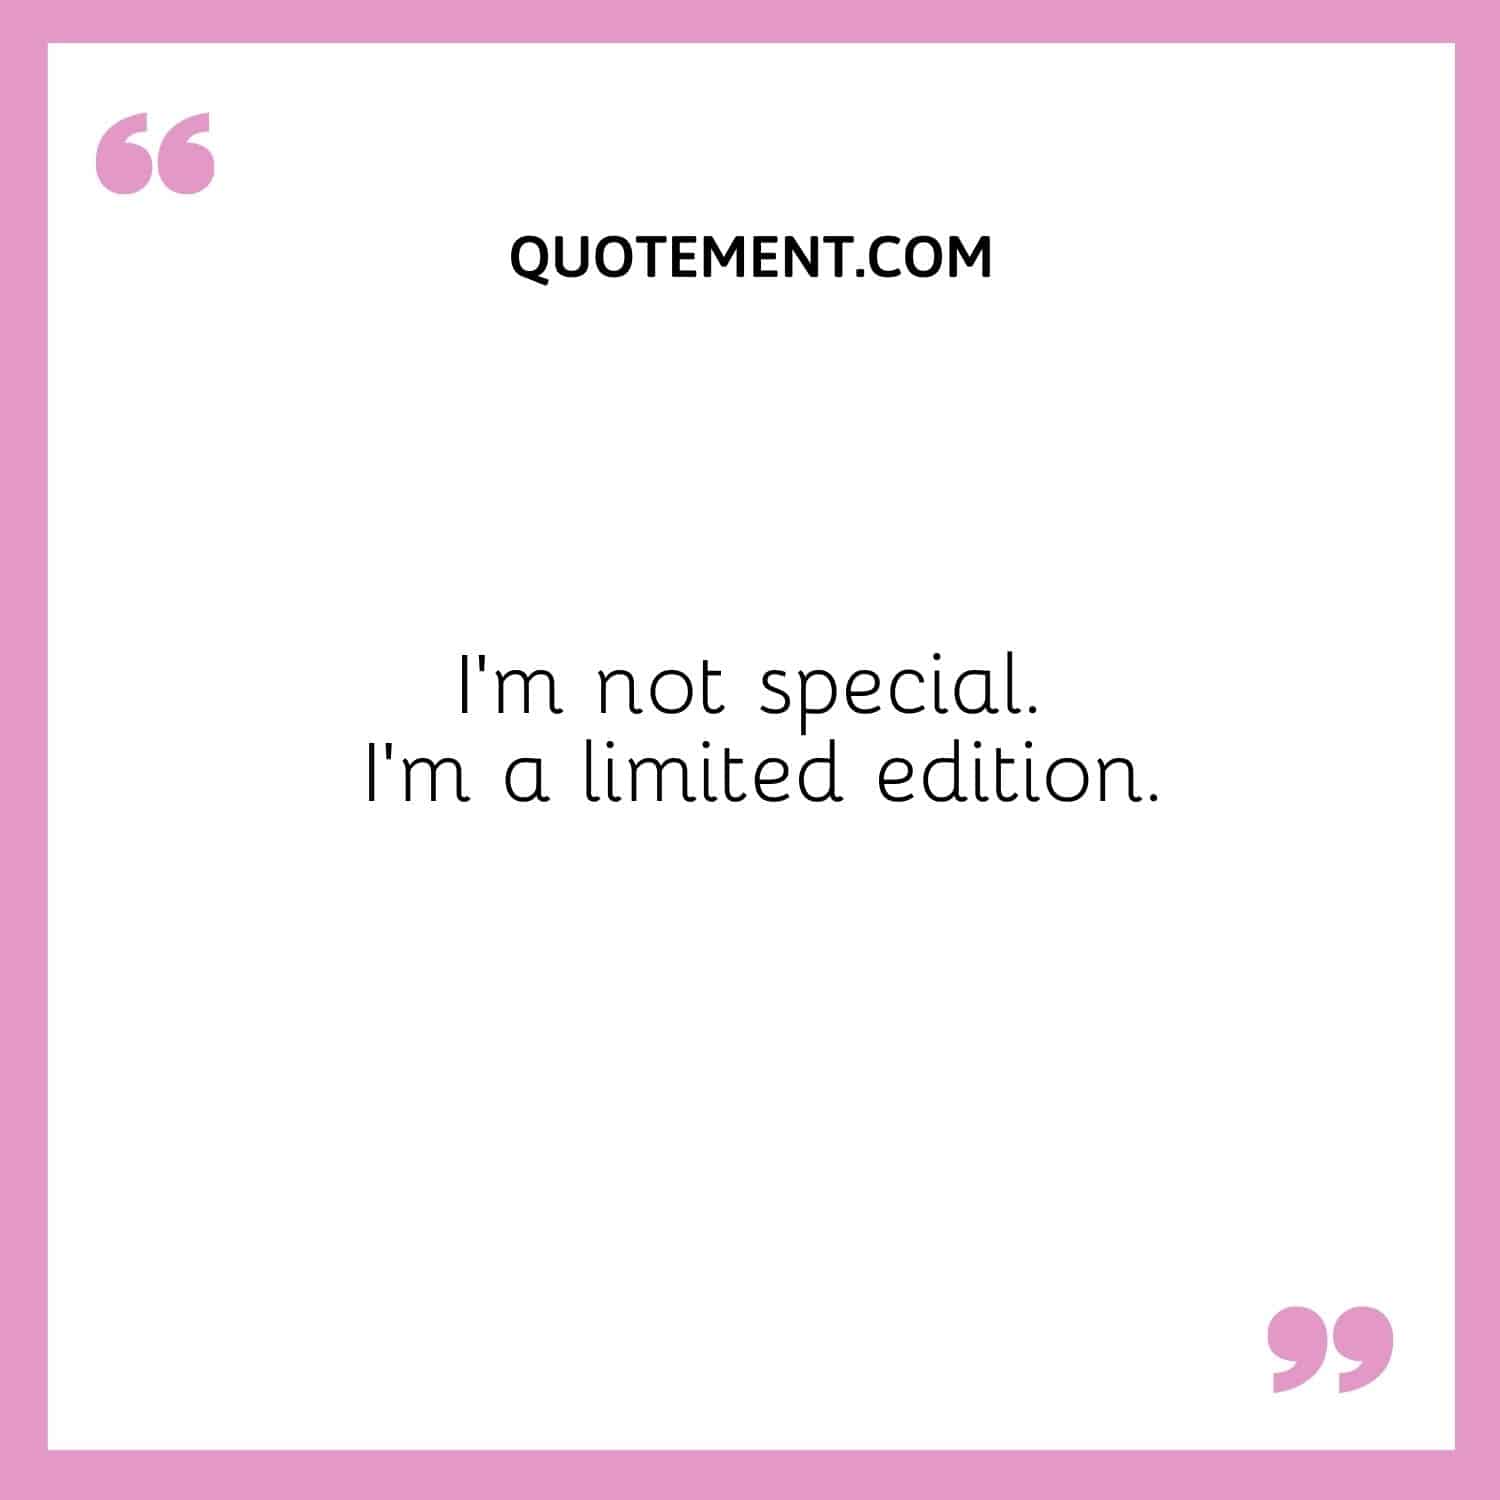 I’m not special. I’m a limited edition.